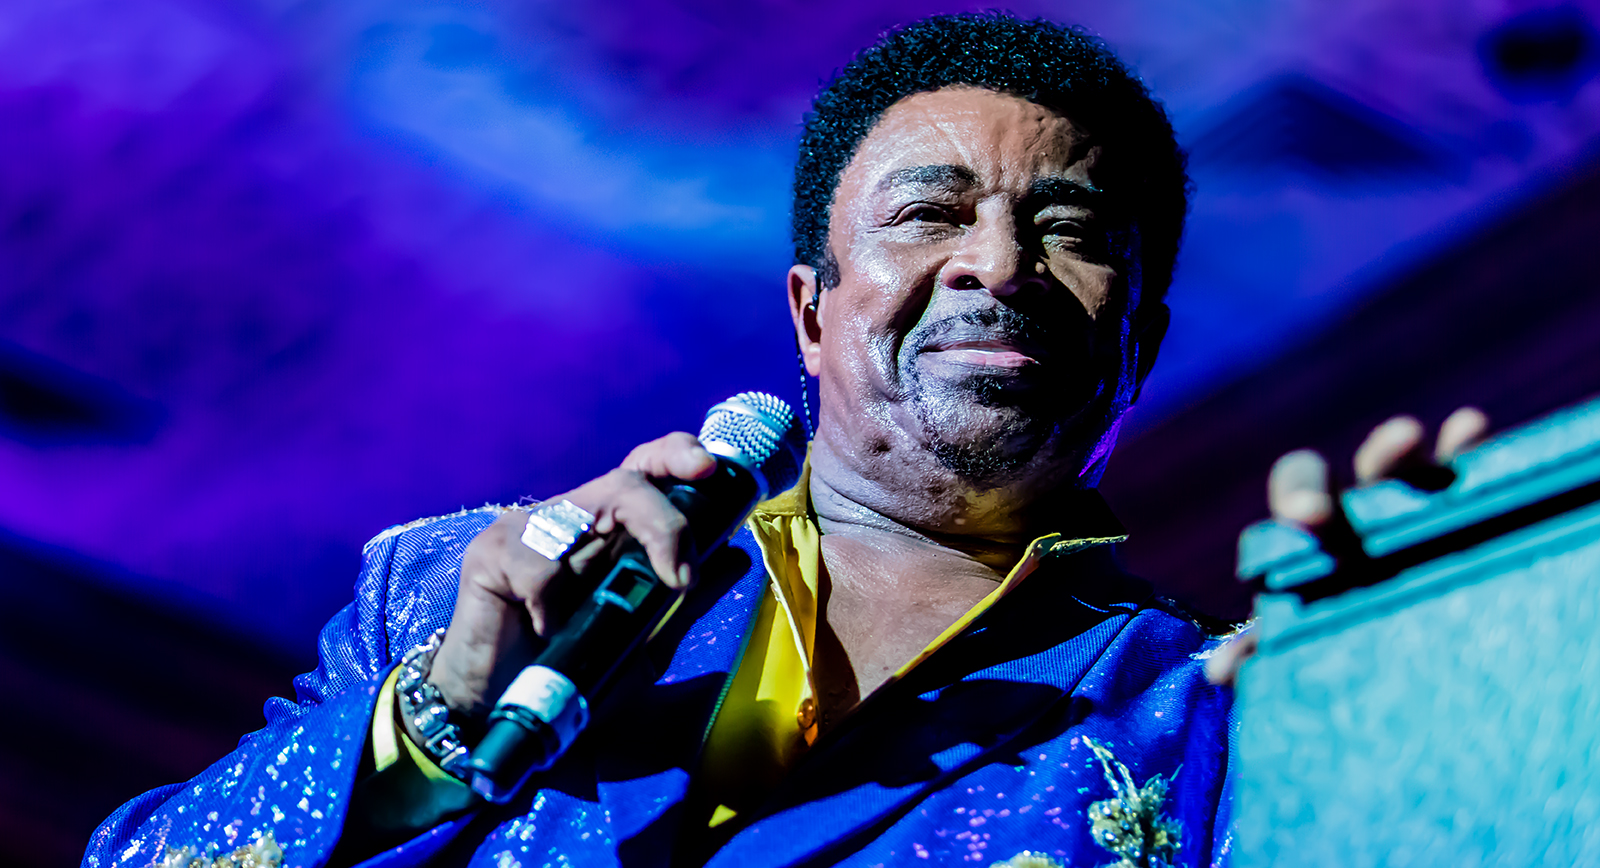 The-Temptations-Concert-Review-Photos-Thunder-Valley-FI